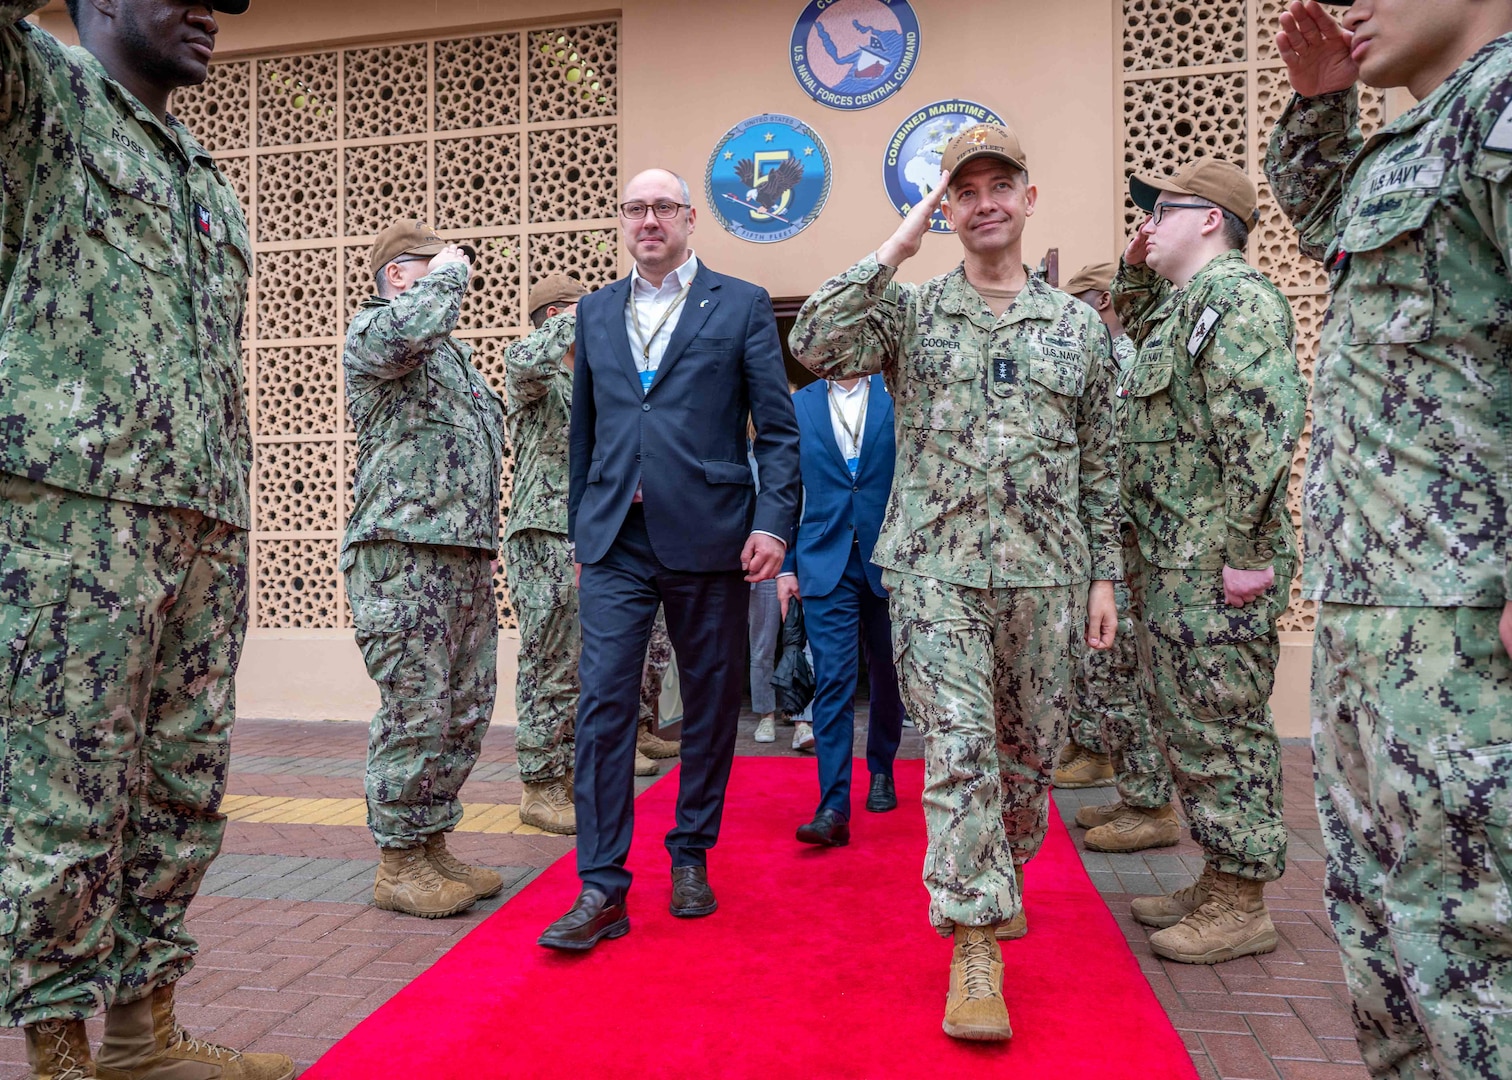 MANAMA, Bahrain (March 13, 2023) Vice Adm. Brad Cooper, commander of U.S. Naval Forces Central Command, U.S. 5th Fleet and Combined Maritime Forces, salutes as he departs  the U.S. Navy’s regional headquarters in Manama, Bahrain, with Ambassador of Ukraine to the United Arab Emirates Dmytro Senik on March 13, 2023.